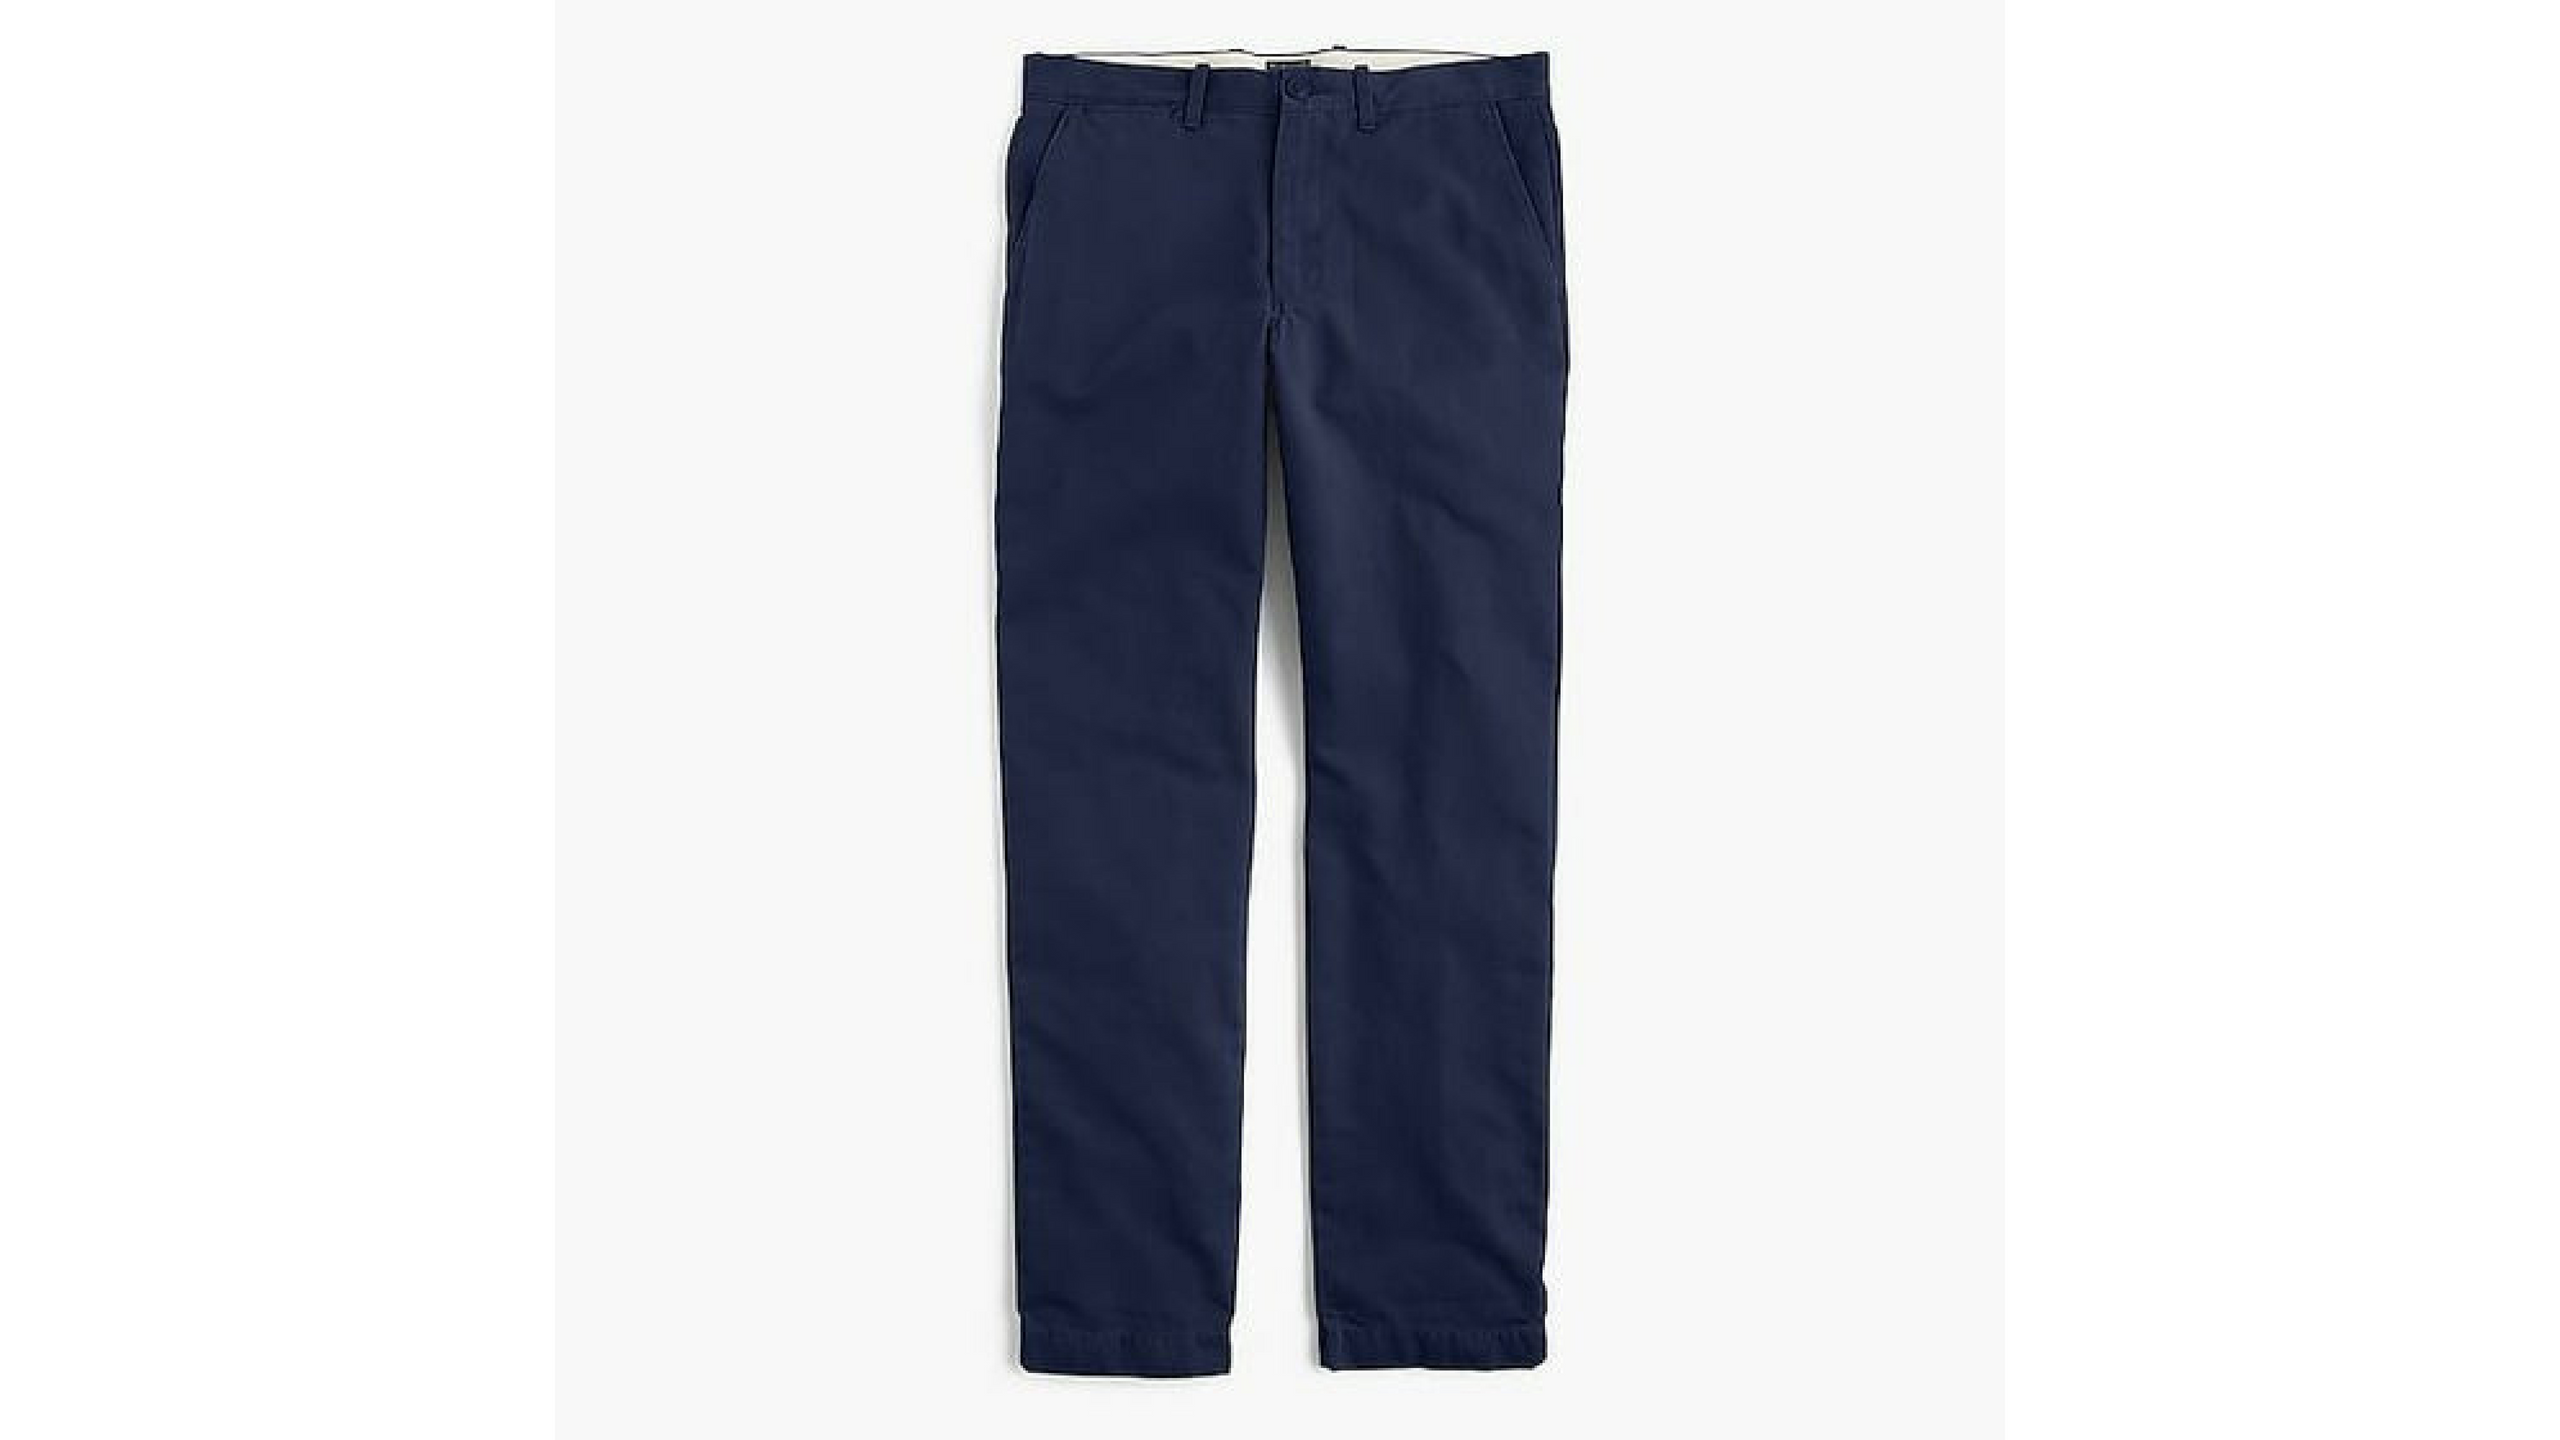 jcrew athletic fit chinos